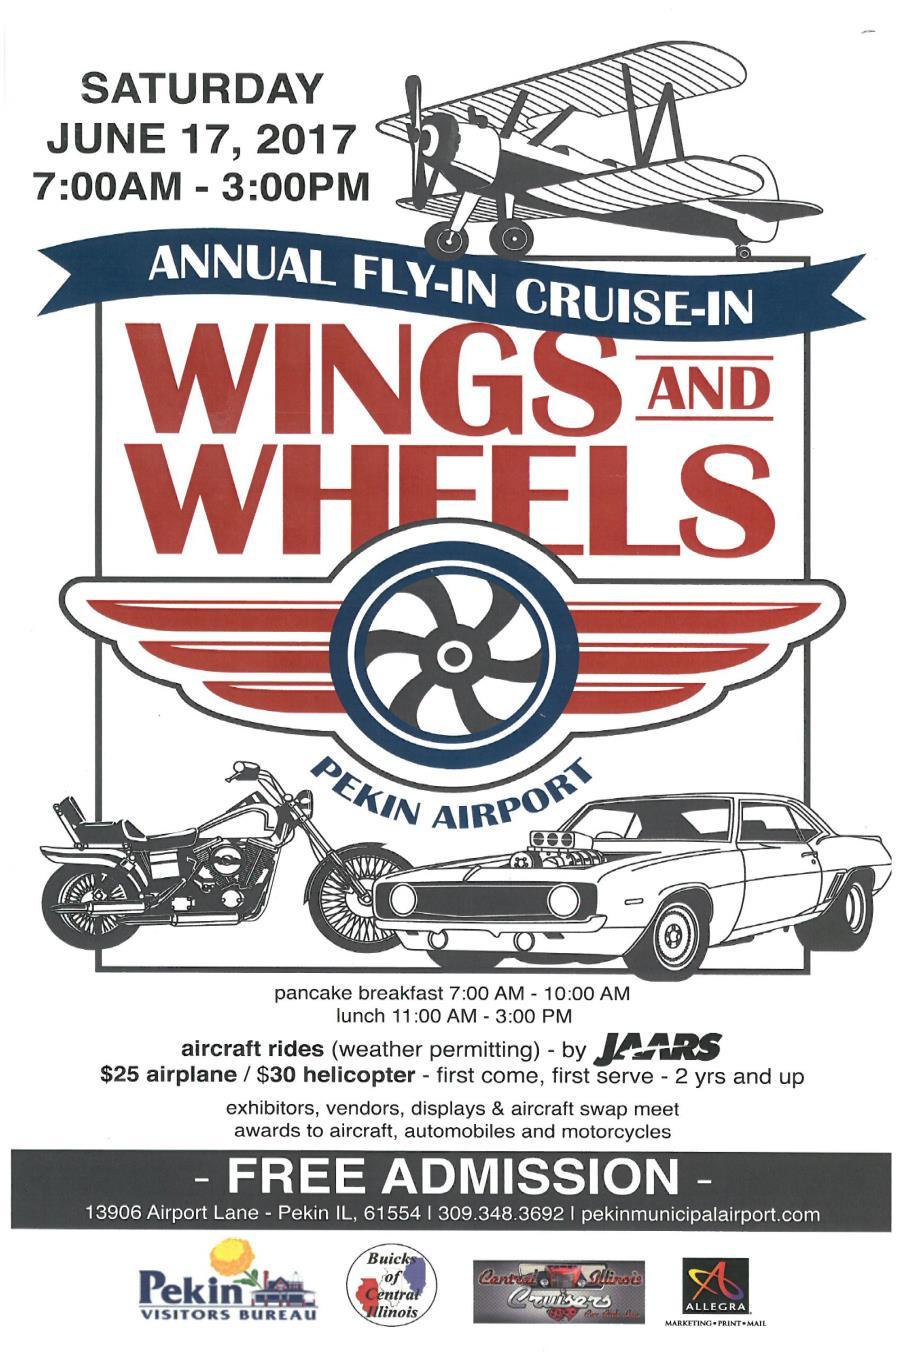 Its time for the pekin airport wings and wheels this saturday. I hope the club will have more planes,gliders,helicopters and drones on display than we had last year.